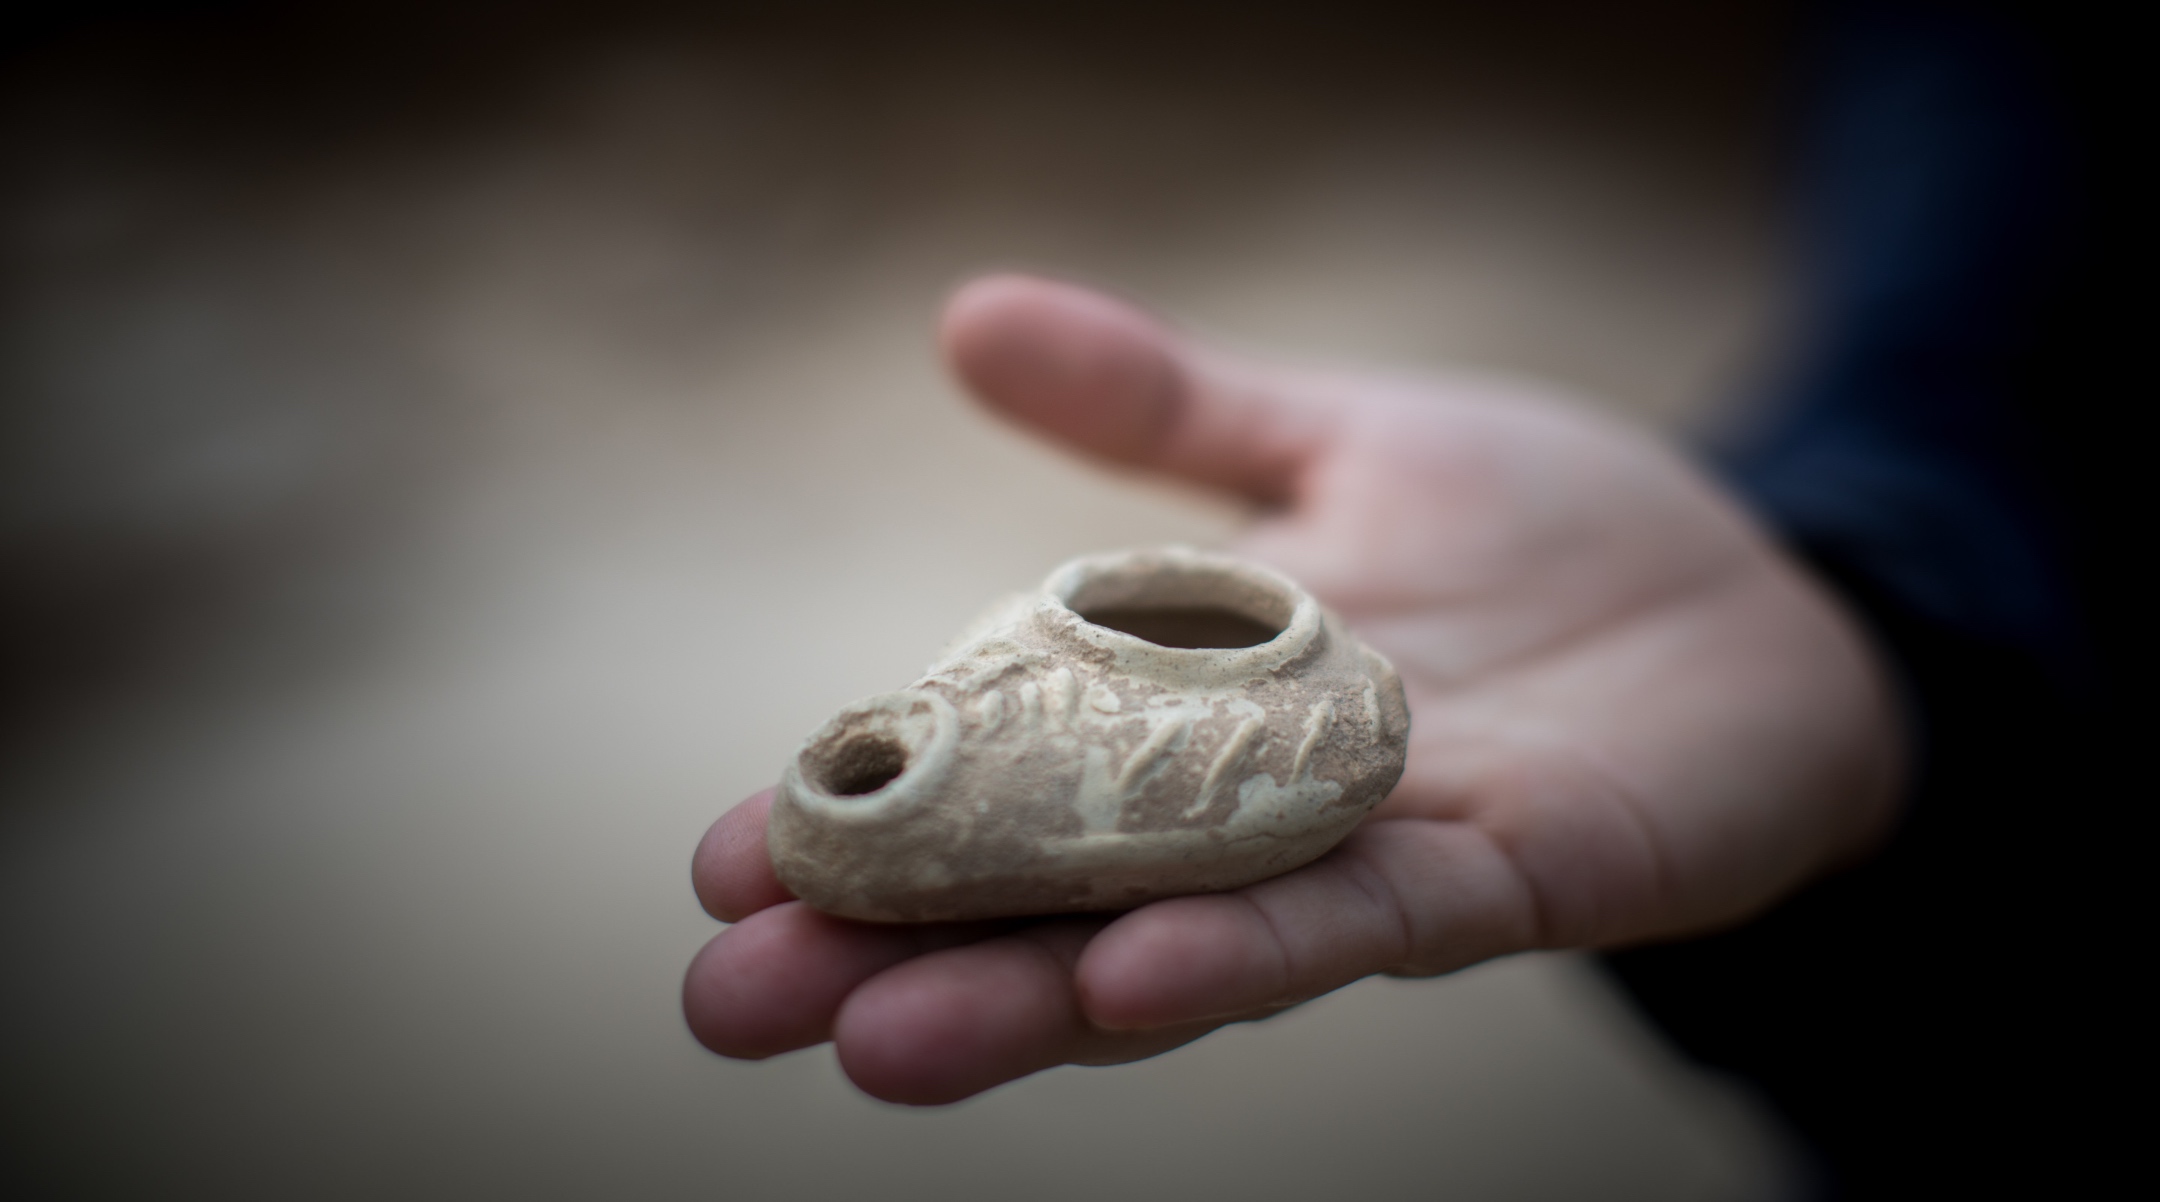 Annette Nagar from the Israel Antiquities Authority shows an oil lamp tool as she stands in an ancient Byzantine church dating from 1,500 years ago discovered during an archaeological rescue excavation near Jerusalem, June 10, 2015. (Yonatan Sindel/Flash90)